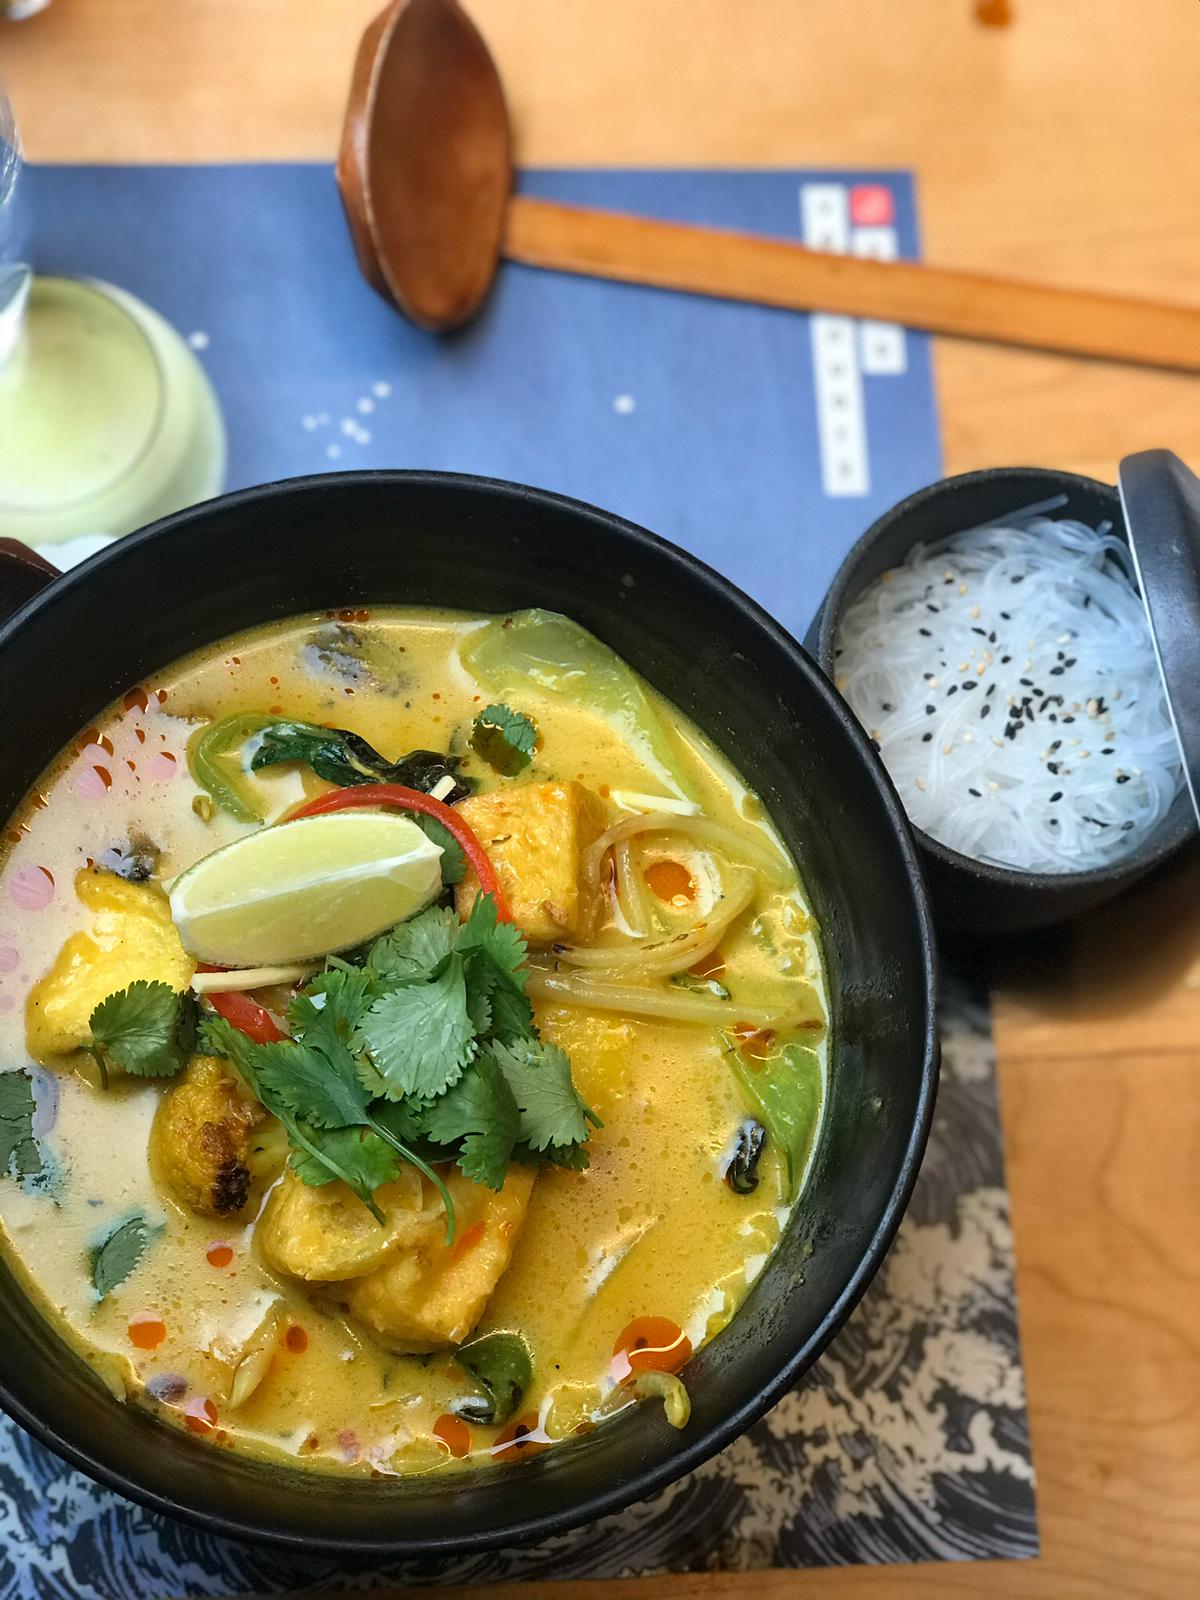 Wagamama Vegan Menu Review - Printworks, Manchester - Flourish With Holly